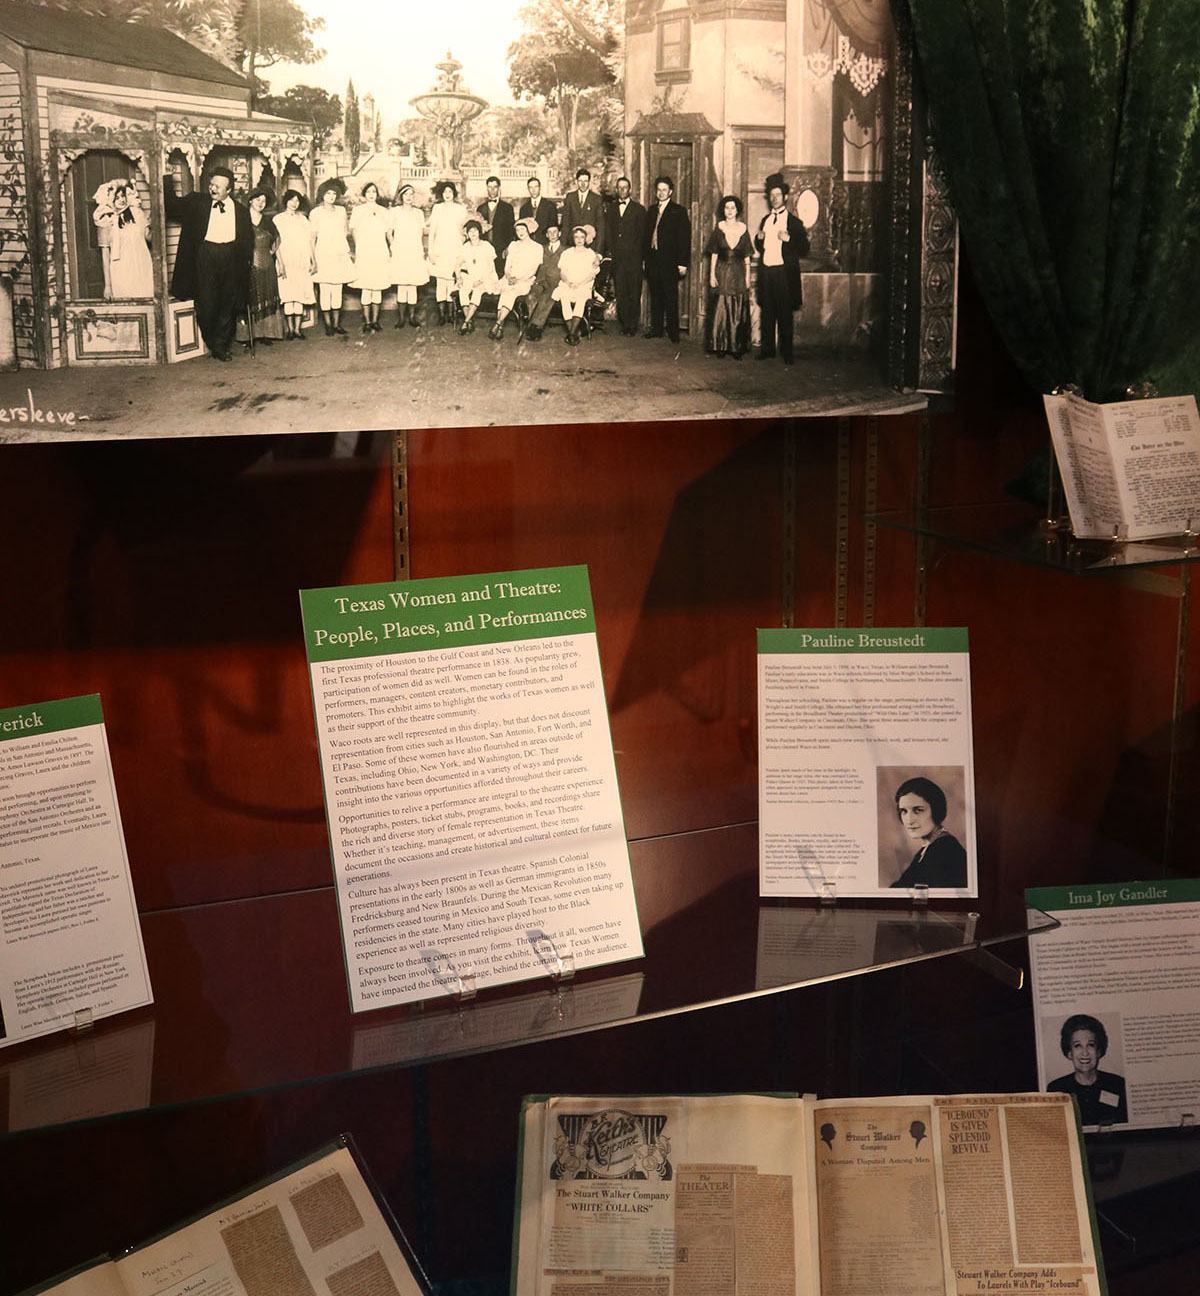 A picture of various artifacts and historical photos on display